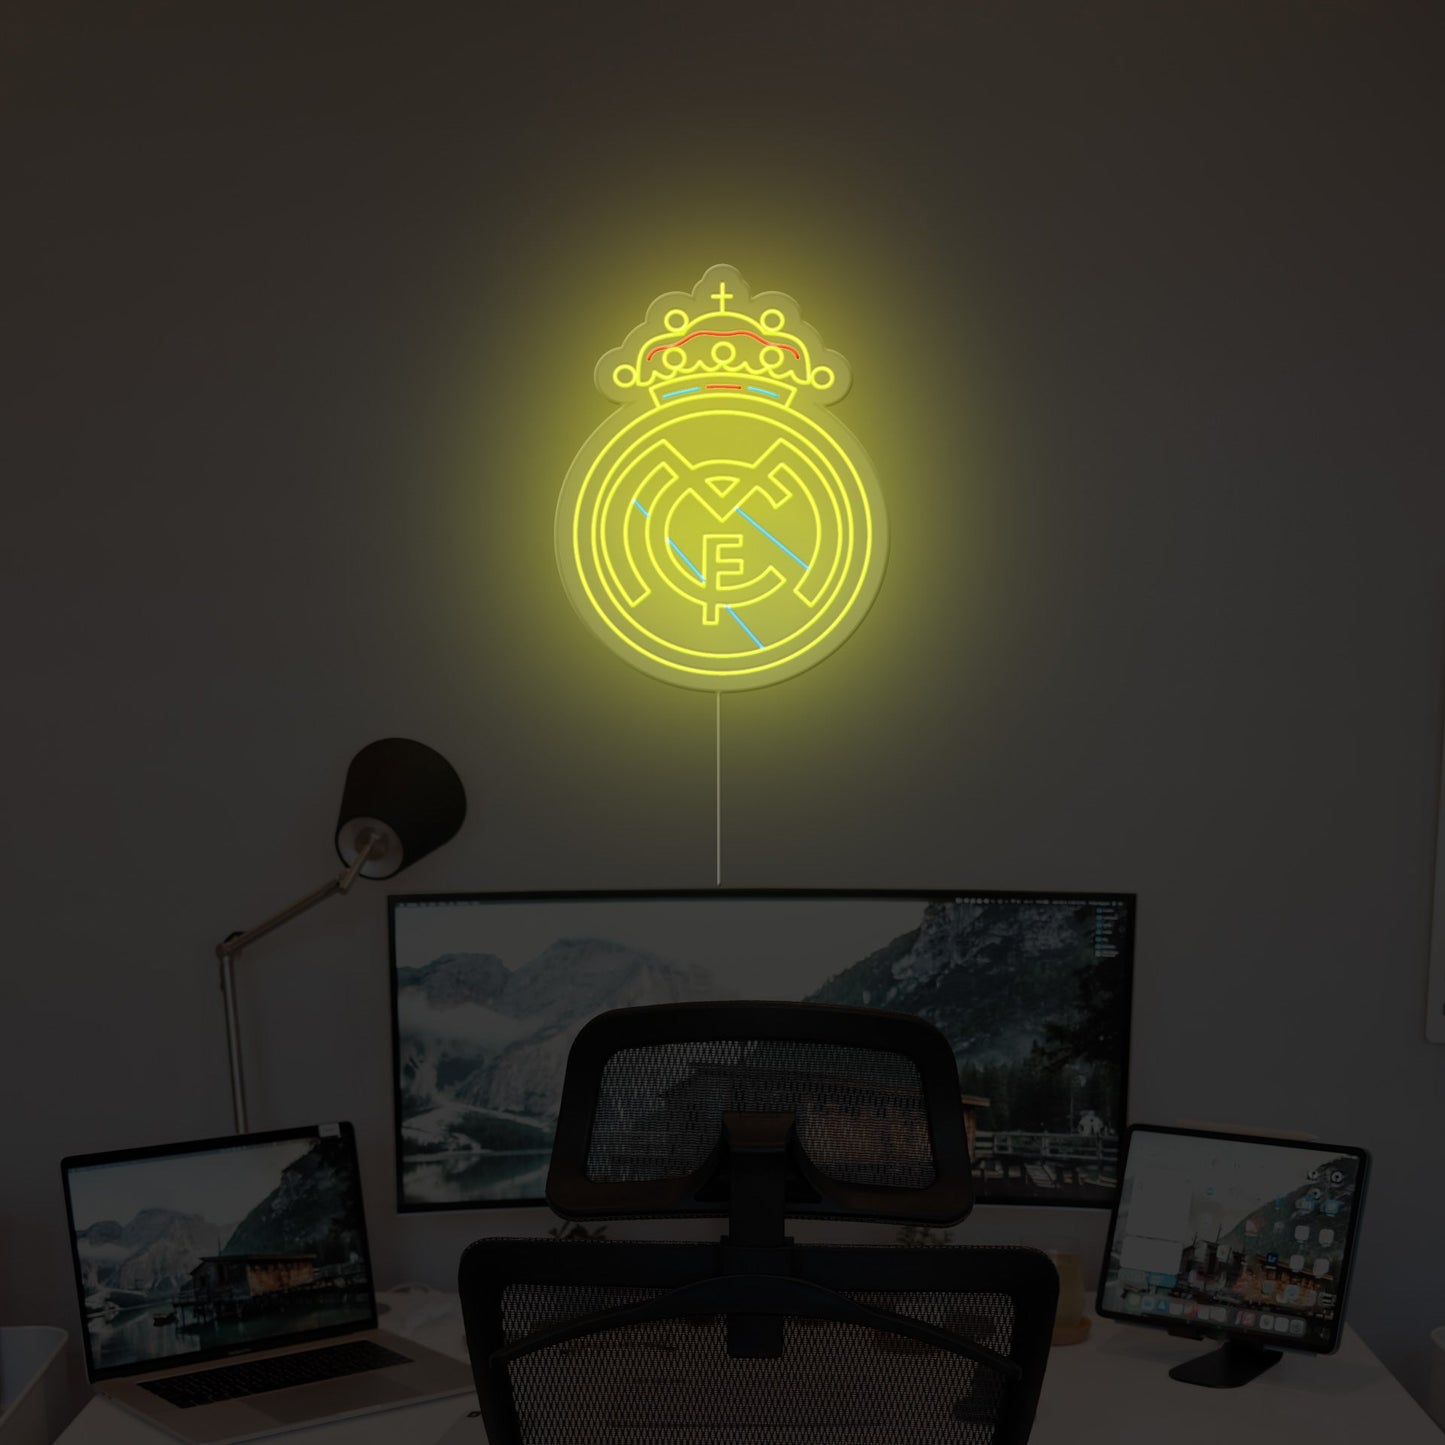 real-madrid-neon-sign